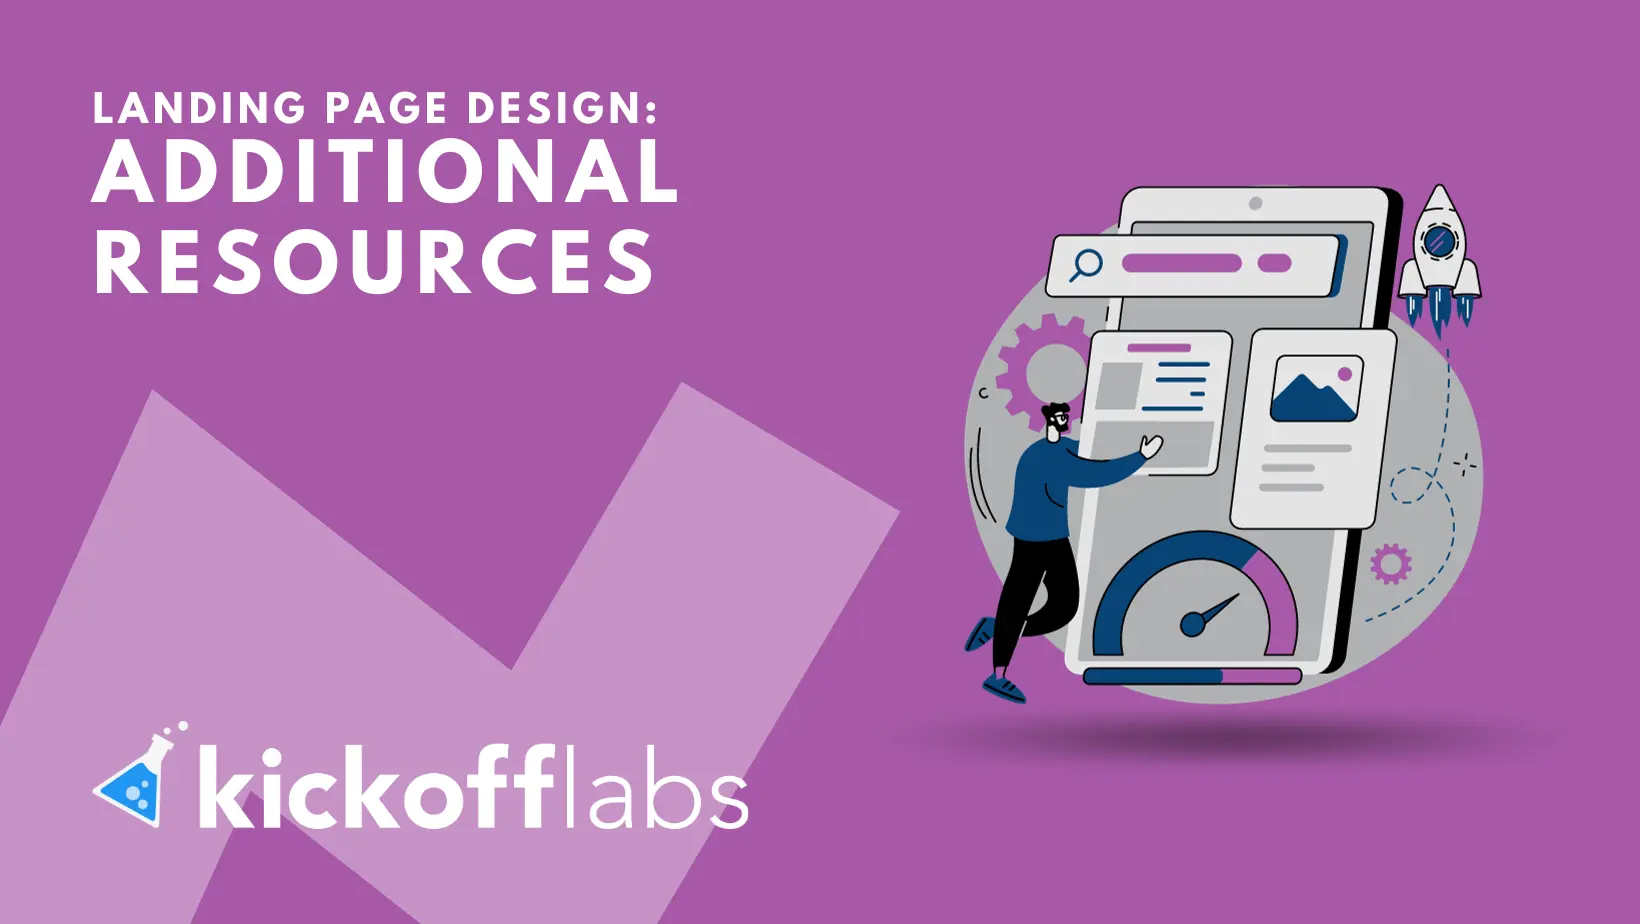 Boost Your Design Skills With These Additional Resources